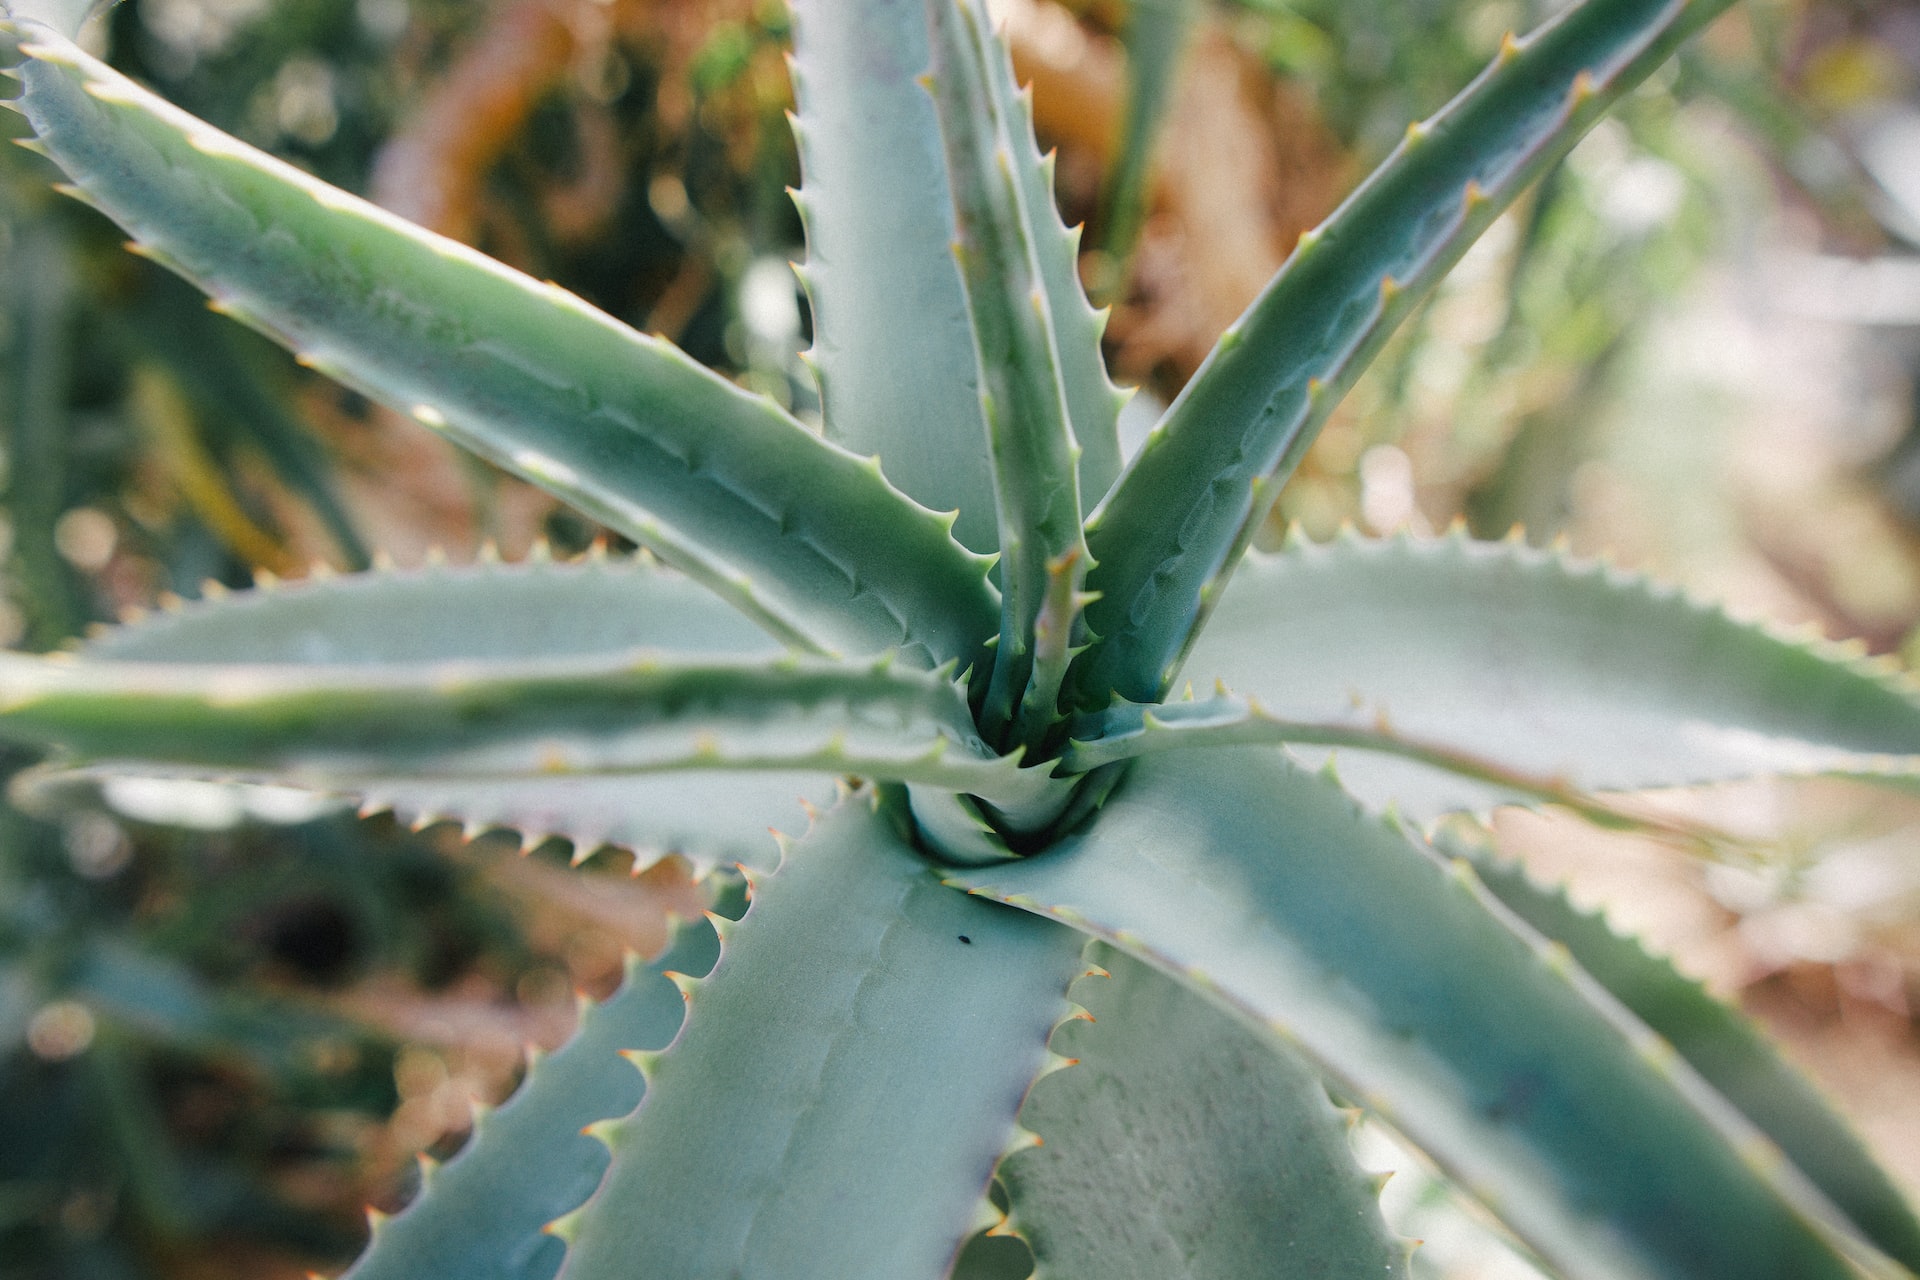 Cosmetics with aloe vera – why are they so popular?